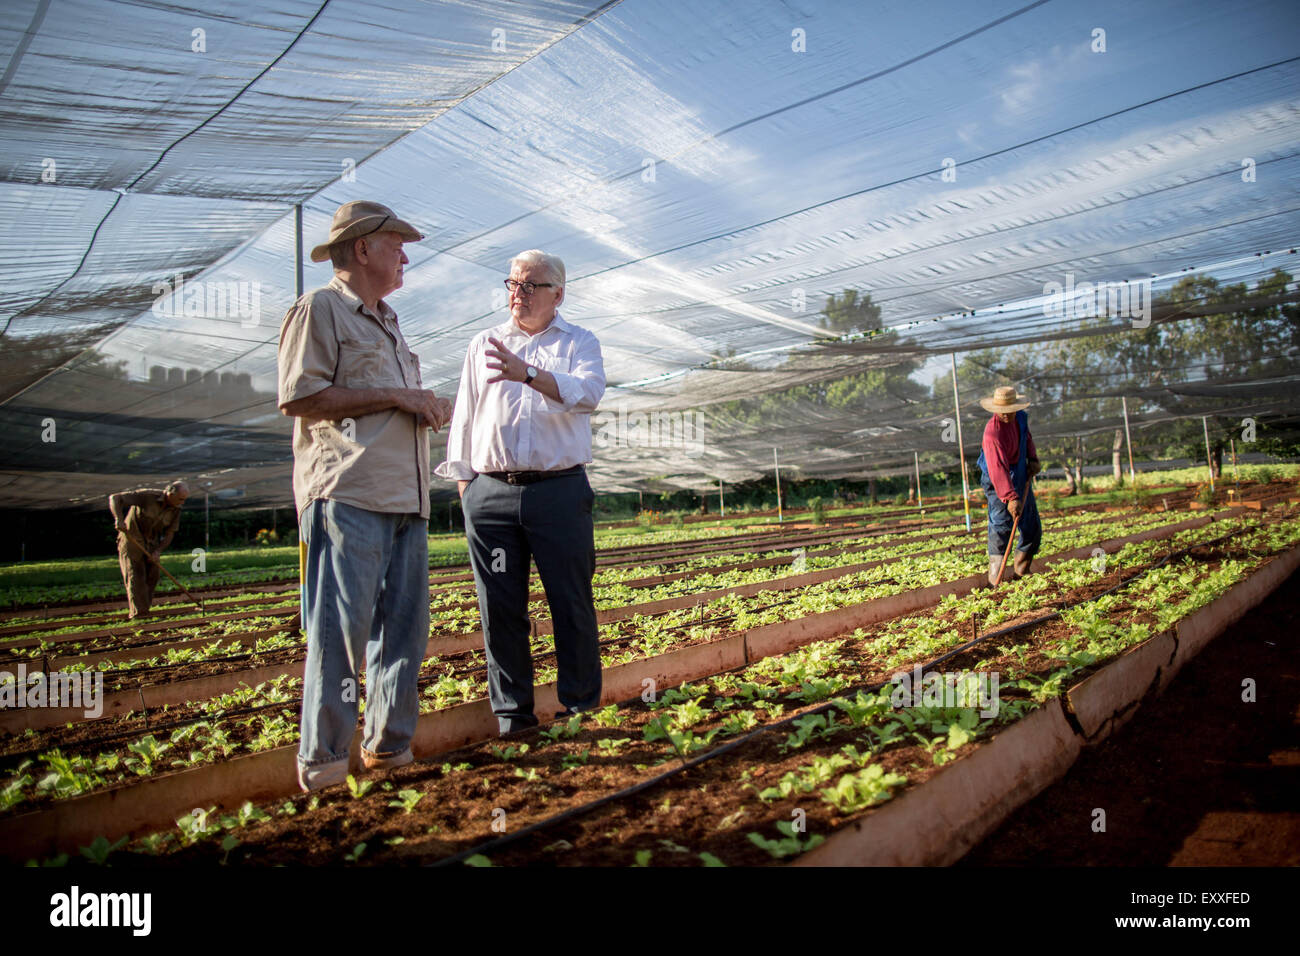 Havana, Cuba. 17th July, 2015. German Foreign Minister Frank-Walter Steinmeier (C) speaks to project manager Miguel Angel Salcines Lopez (L) during a visit to the urban agriculture project 'Vivero Alamar' funded by the Deutsche Welthungerhilfe (German Agro Action) in Havana, Cuba, 17 July 2015. Steinmeier is the first German Foreign Minister to visit Cuba. PHOTO: MICHAEL KAPPELER/dpa/Alamy Live News Stock Photo